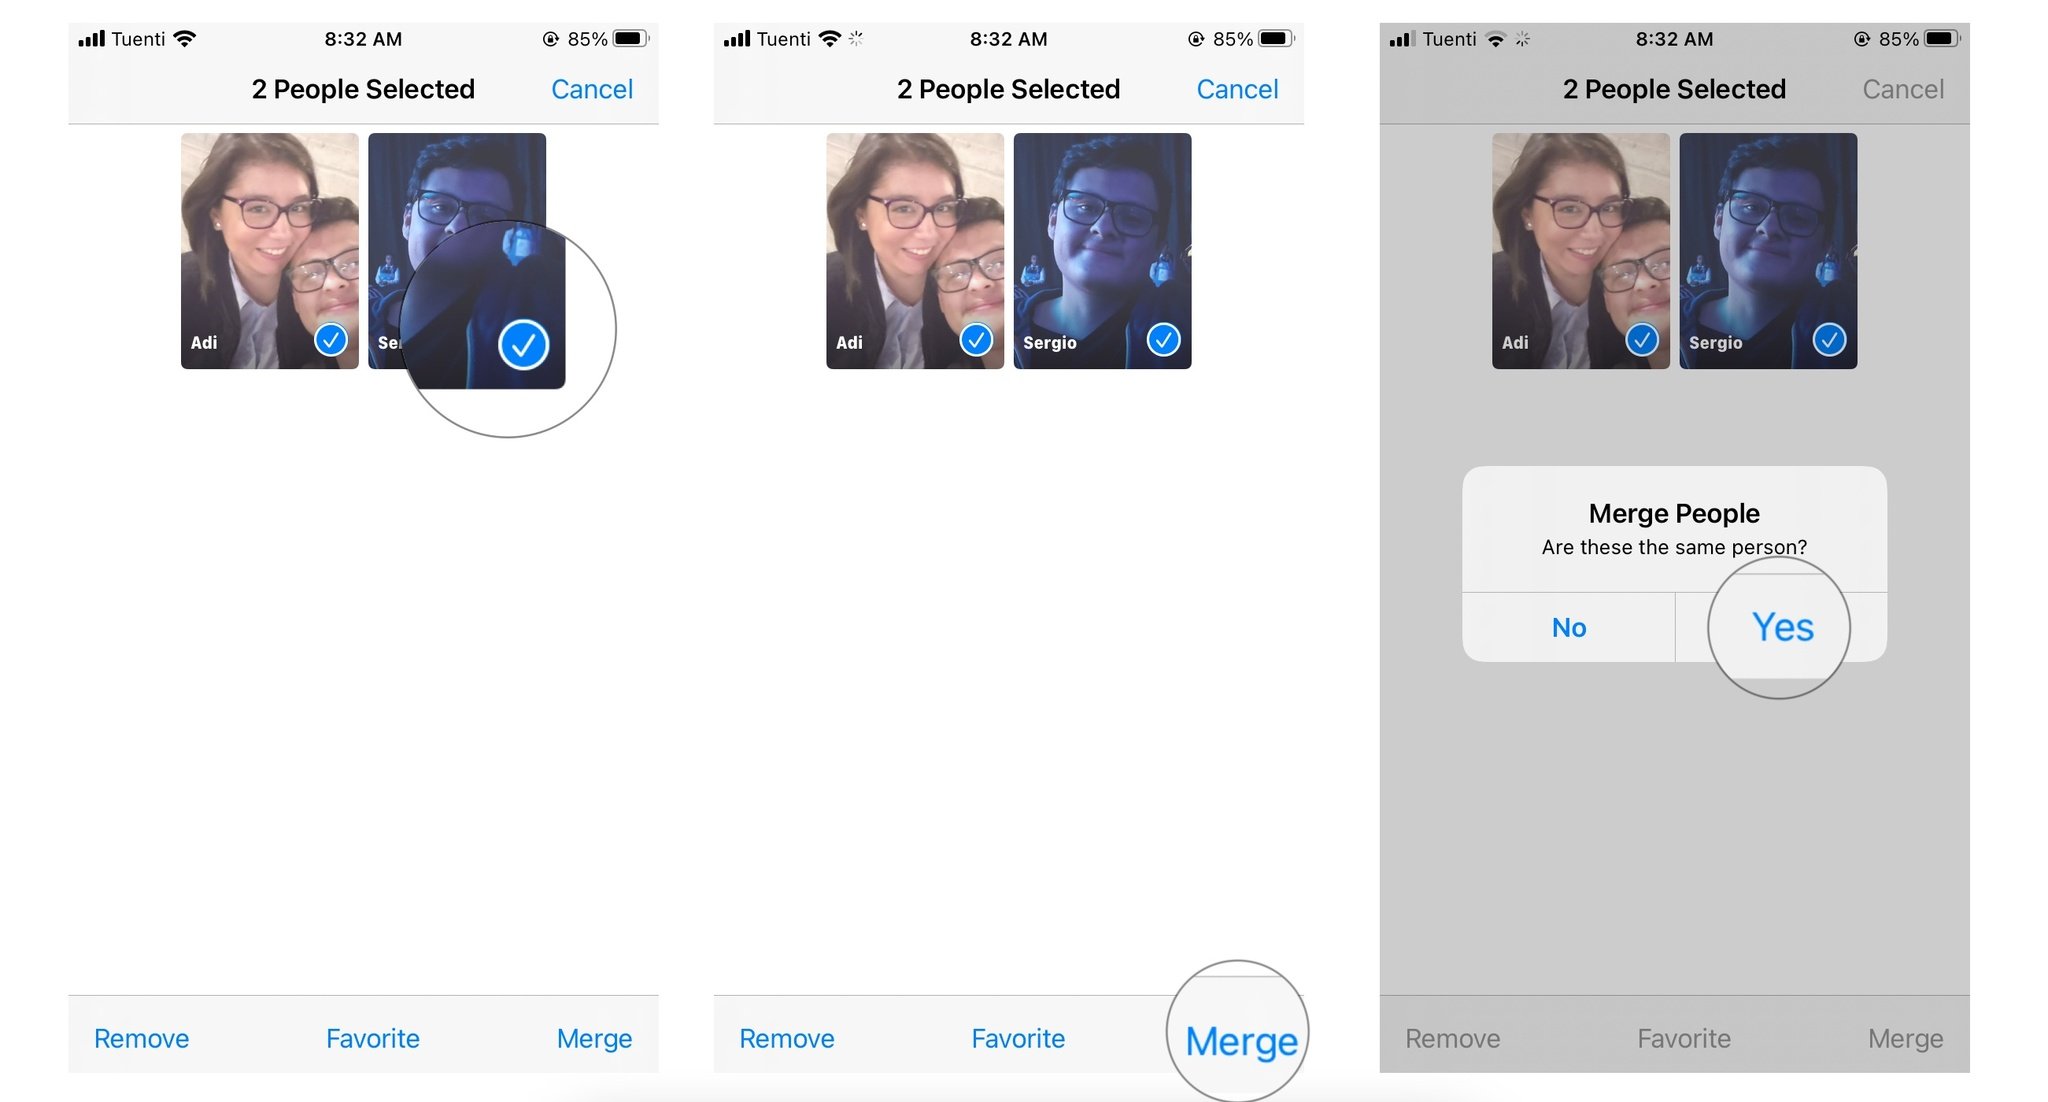 How to Merge people in Photos: Select the people or faces you want to merge, tap on Merge, select Yes